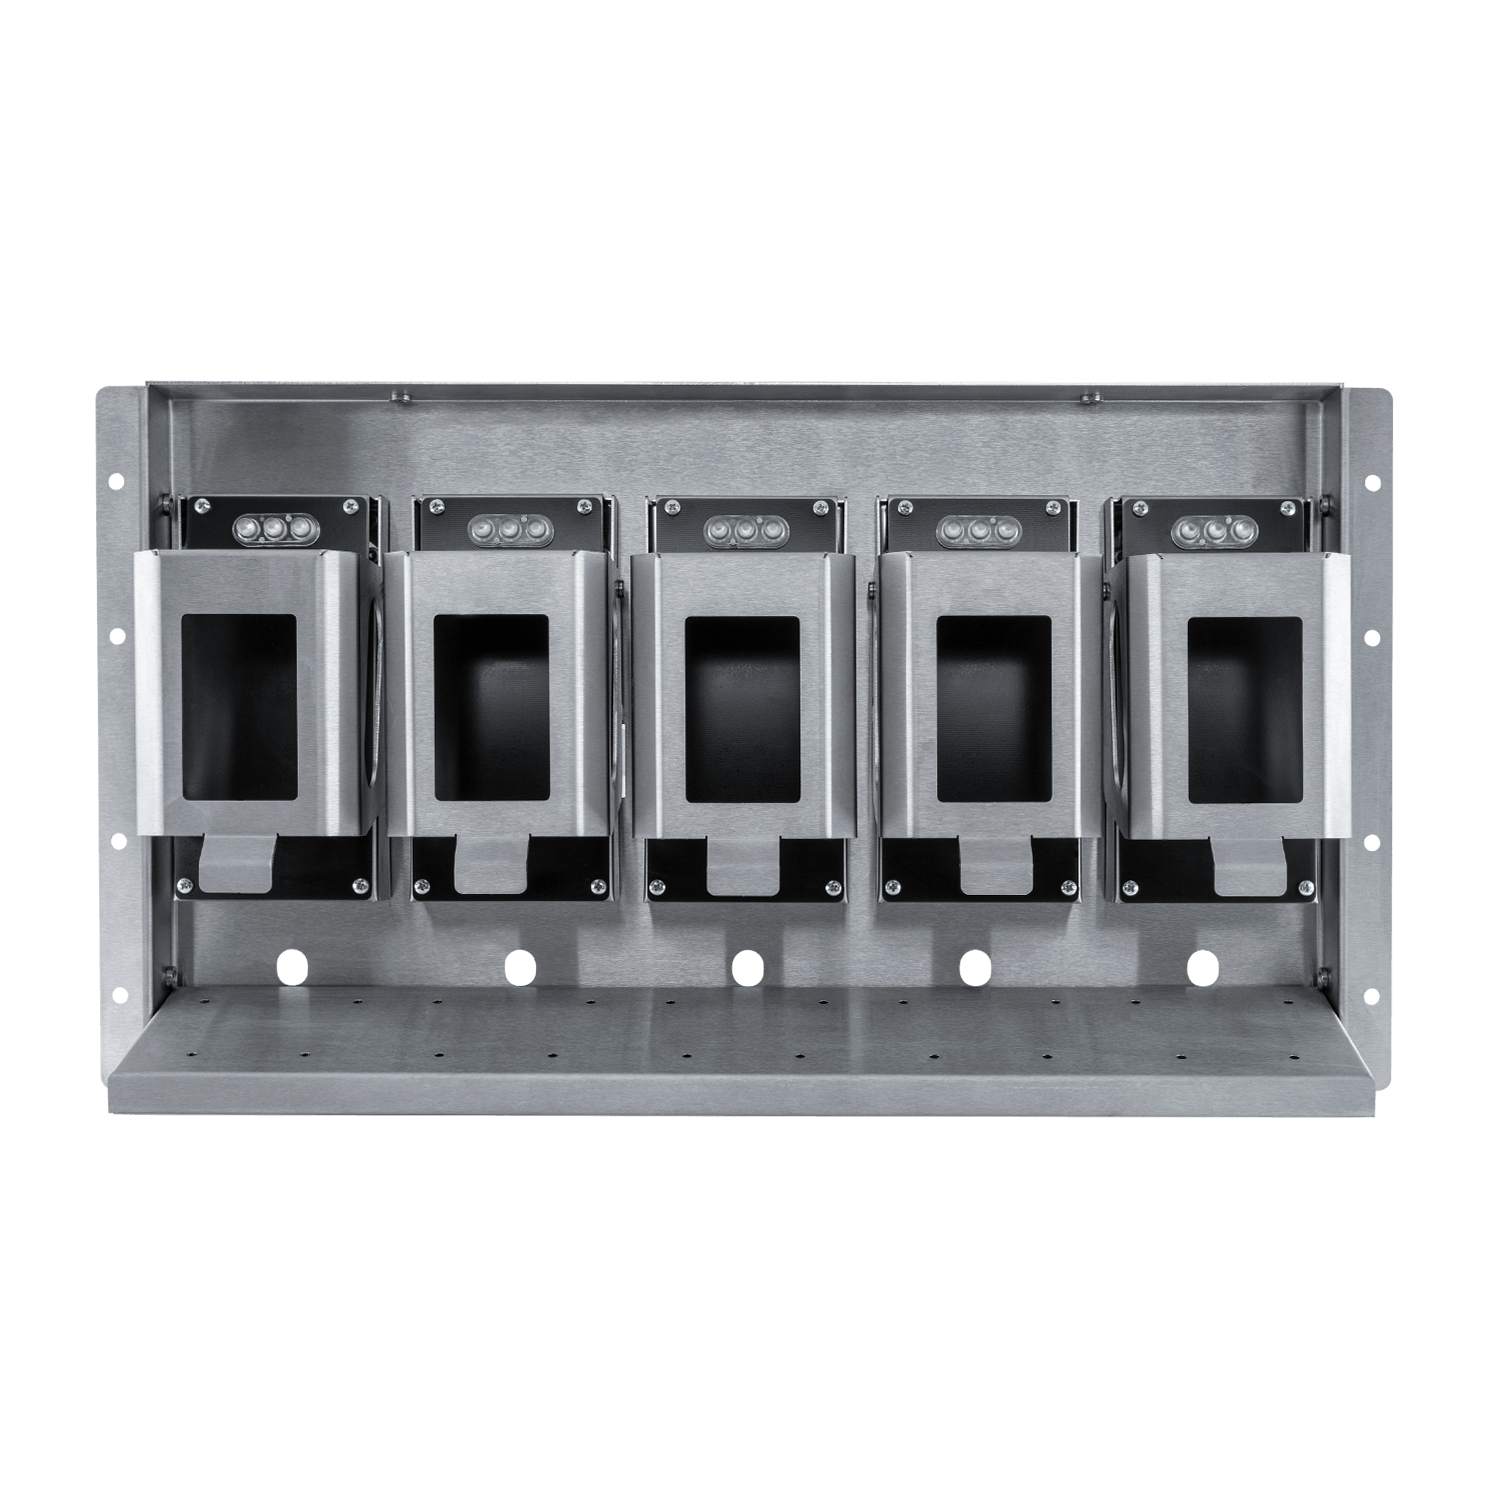 Built-in panel for the storage of 5 radios. Front view